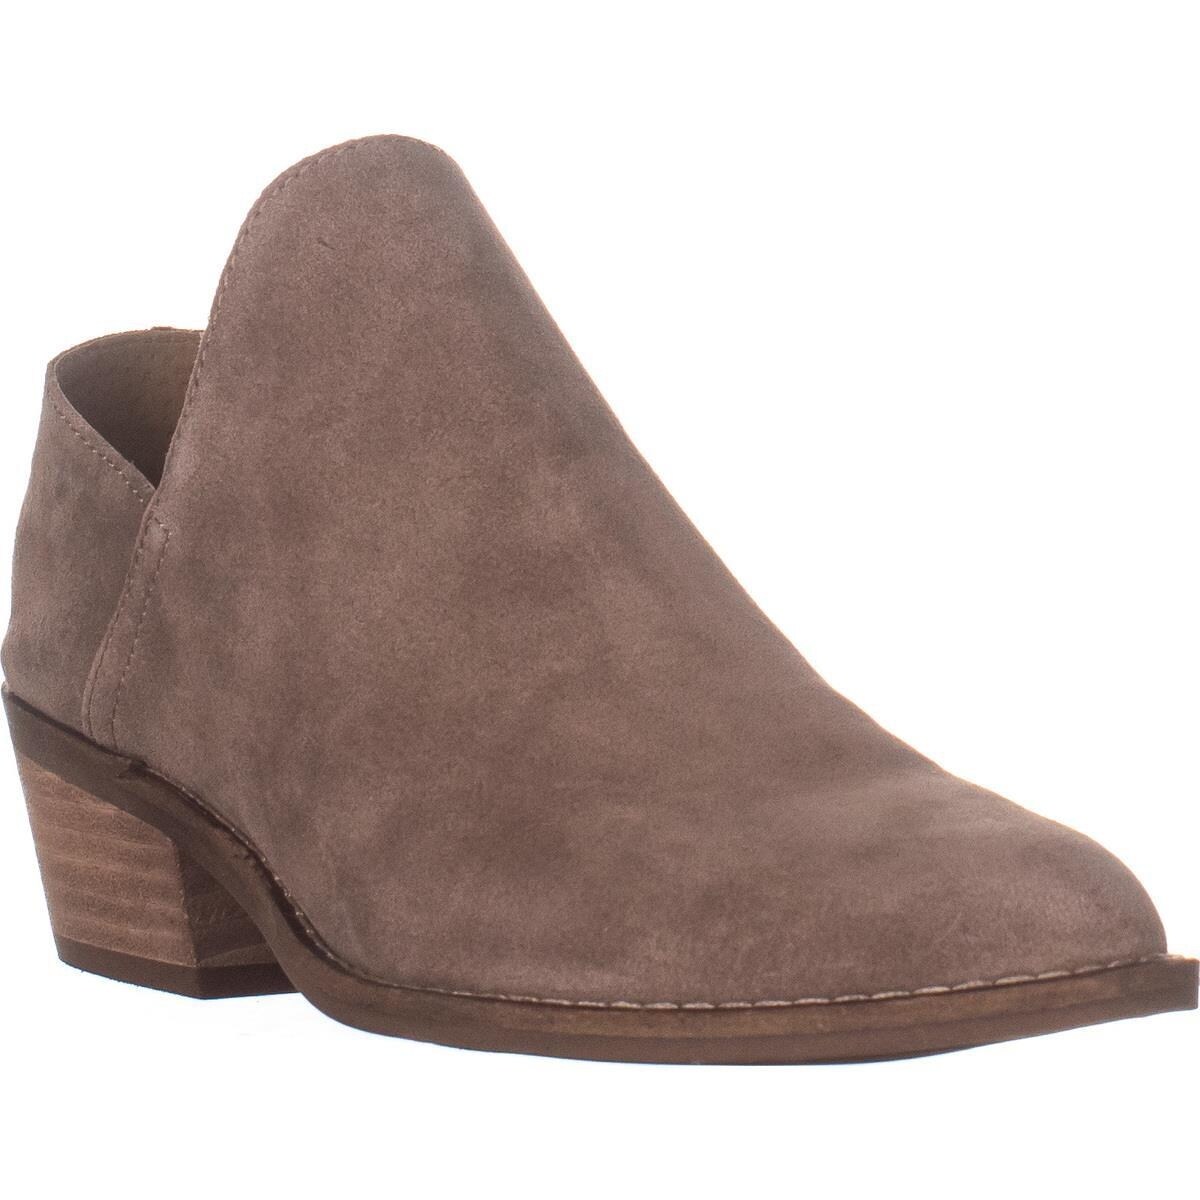 lucky brand women's fausst ankle boot